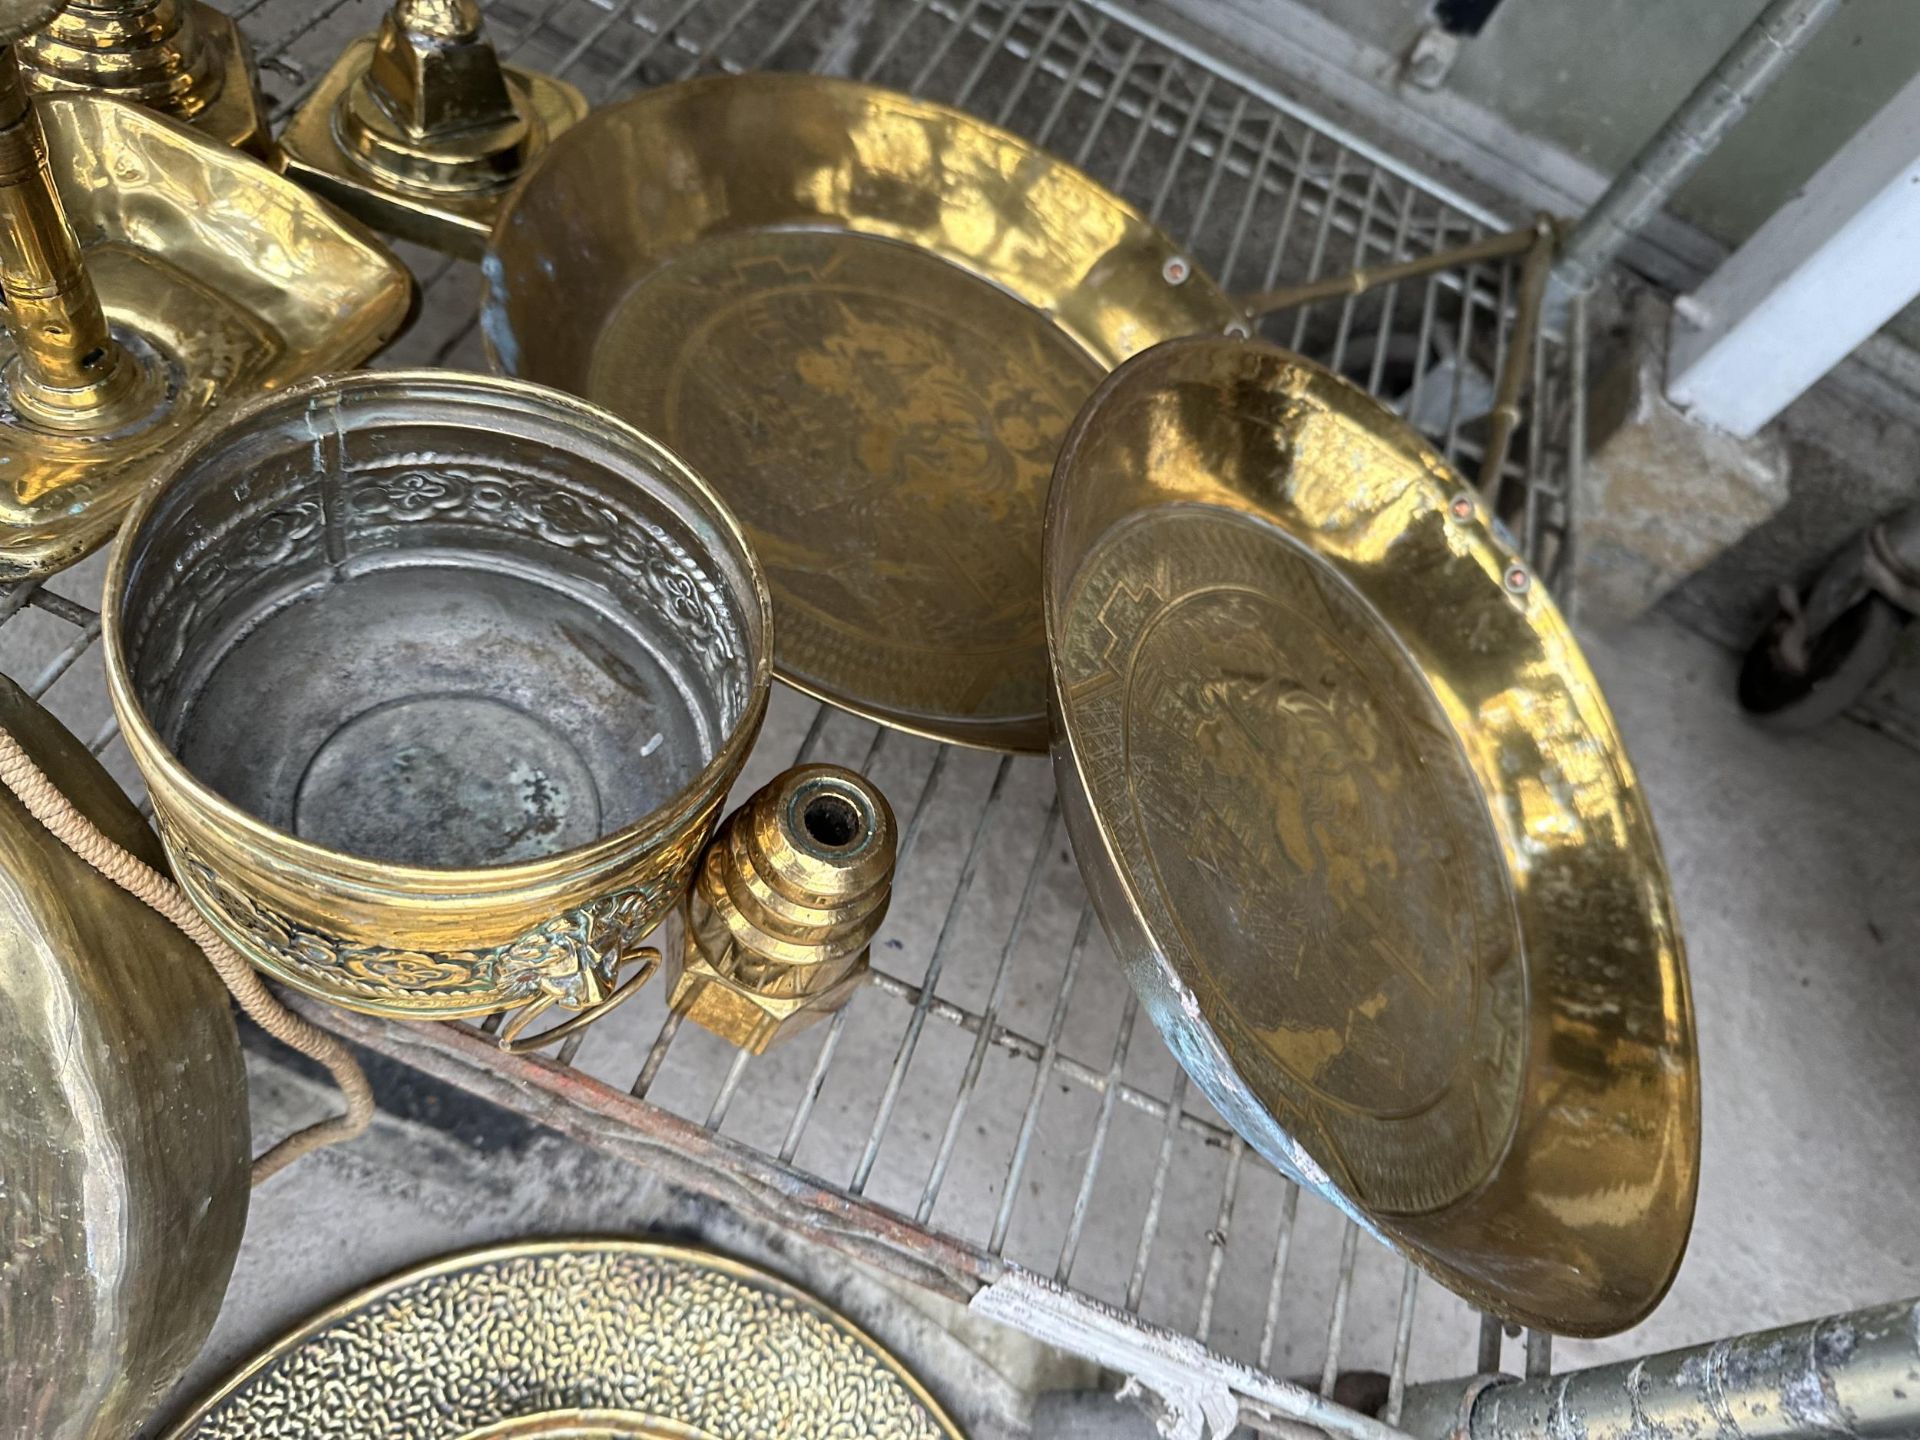 A LARGE ASSORTMENT OF BRASS ITEMS TO INCLUDE PANS, CHARGERS,A GONG AND CANDLE STICKS ETC - Image 3 of 4